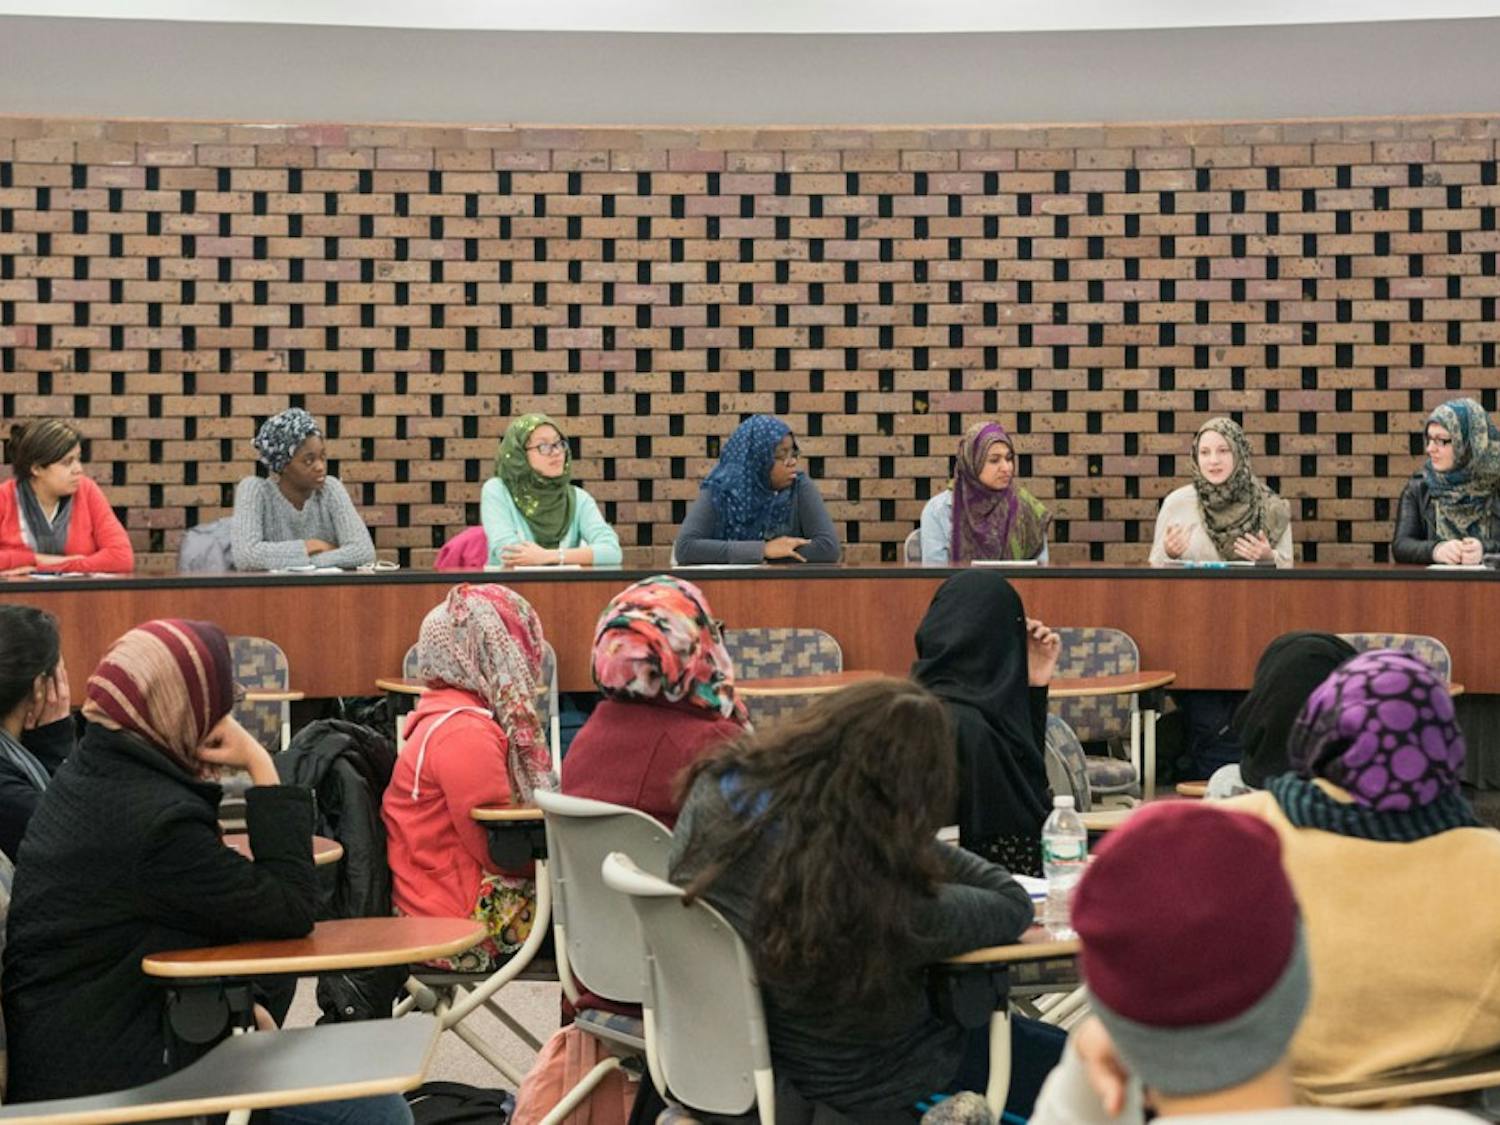 The Muslim Women’s Council’s “Cover a Mile in Her Scarf” event on Feb. 20 helped break down stereotypes against Muslims. The new MWC event “Ask a Muslim Woman” allowed non-Muslims to ask questions about Islam to further break down those stereotypes.